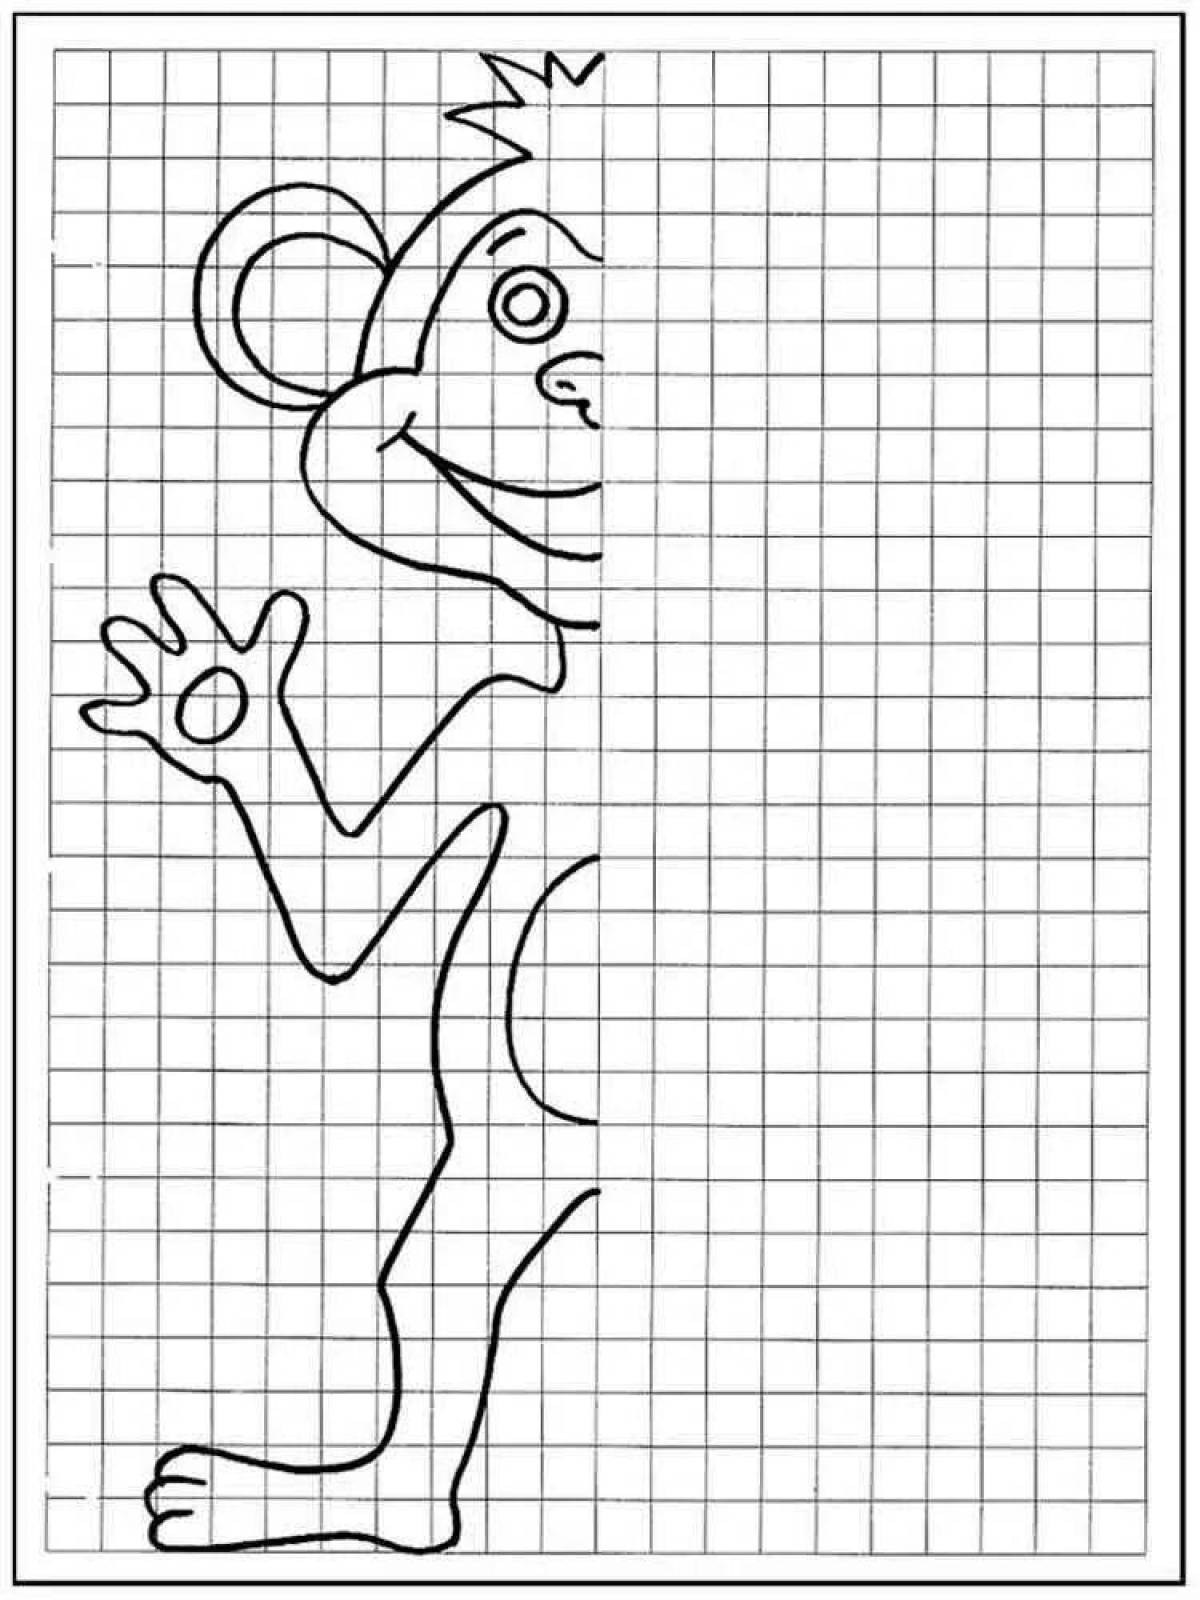 Fascinating cage coloring page